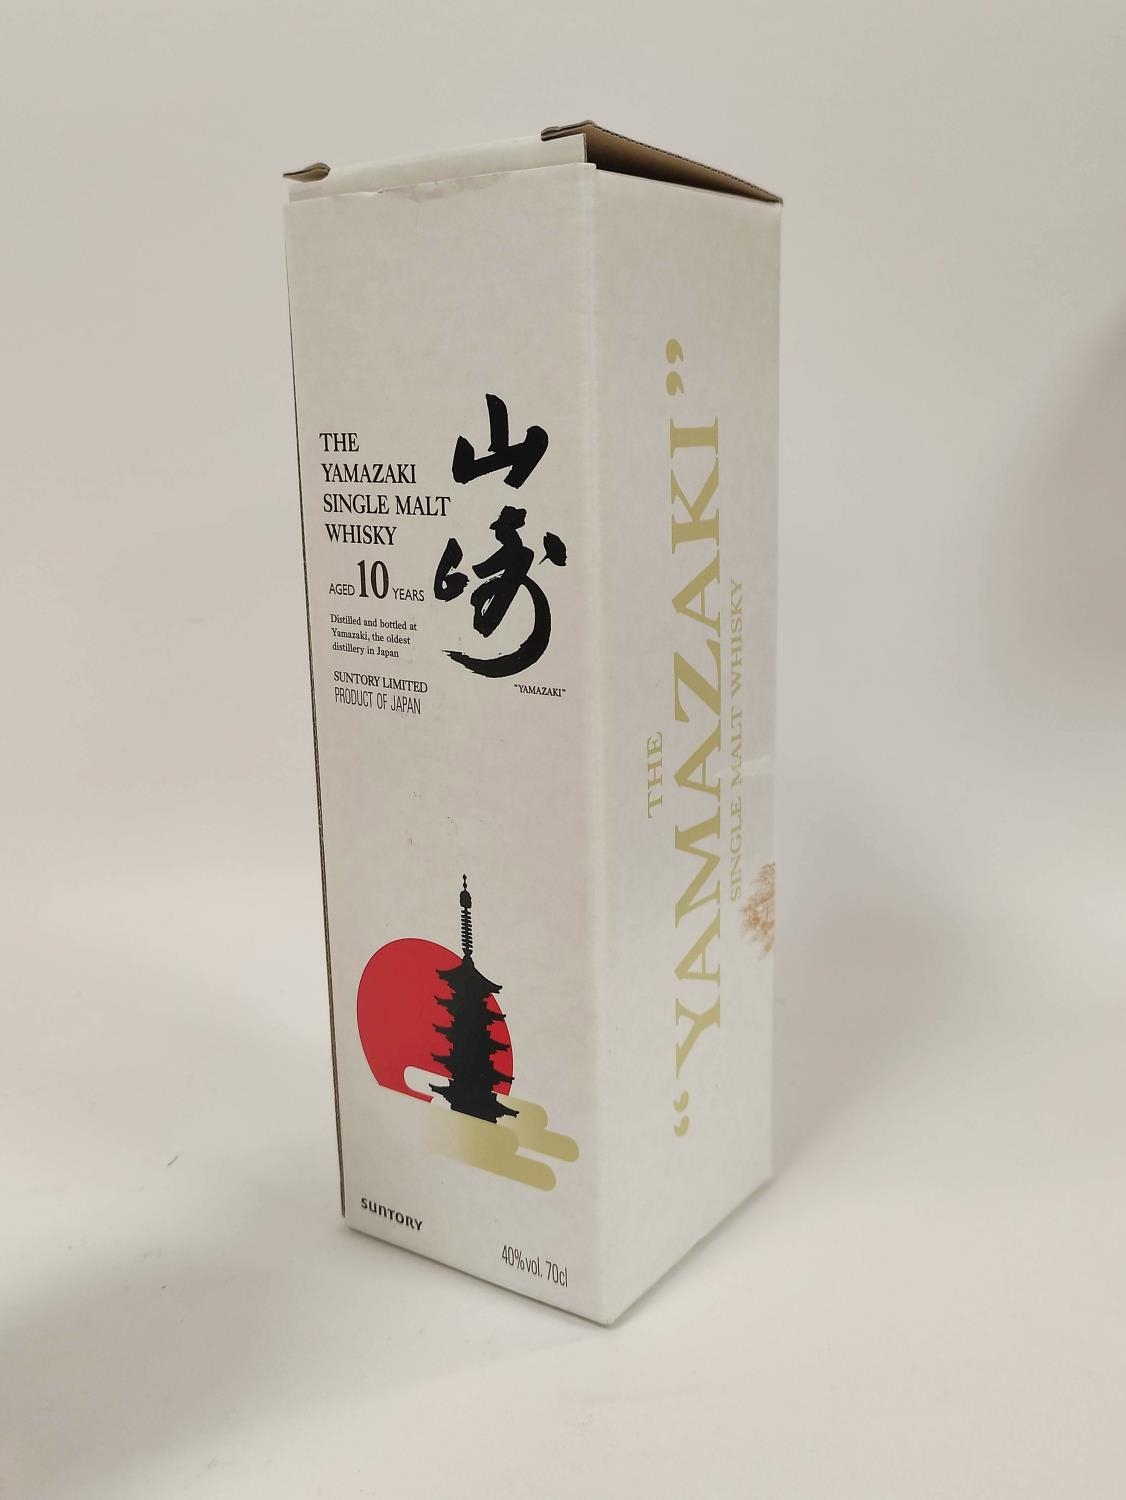 The Yamazaki 10 years old single malt Whisky, distilled and bottled in Japan, 70cl, 40% vol, boxed. - Image 5 of 5